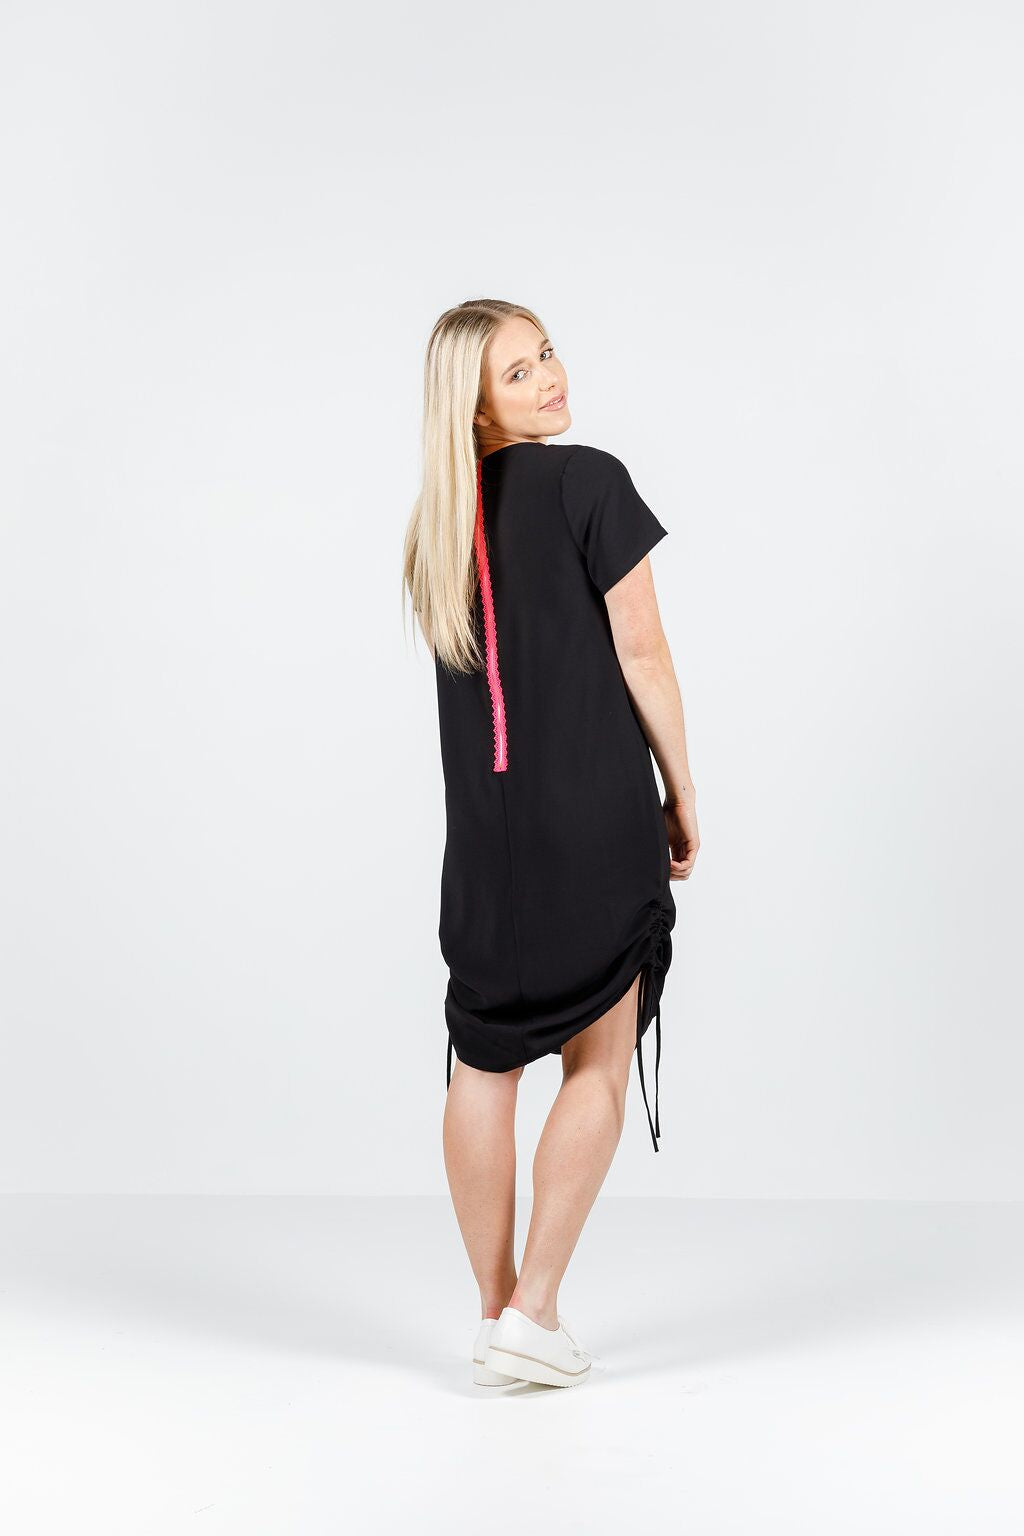 Ruched Zip Dress - Sale - Black with pink zipper